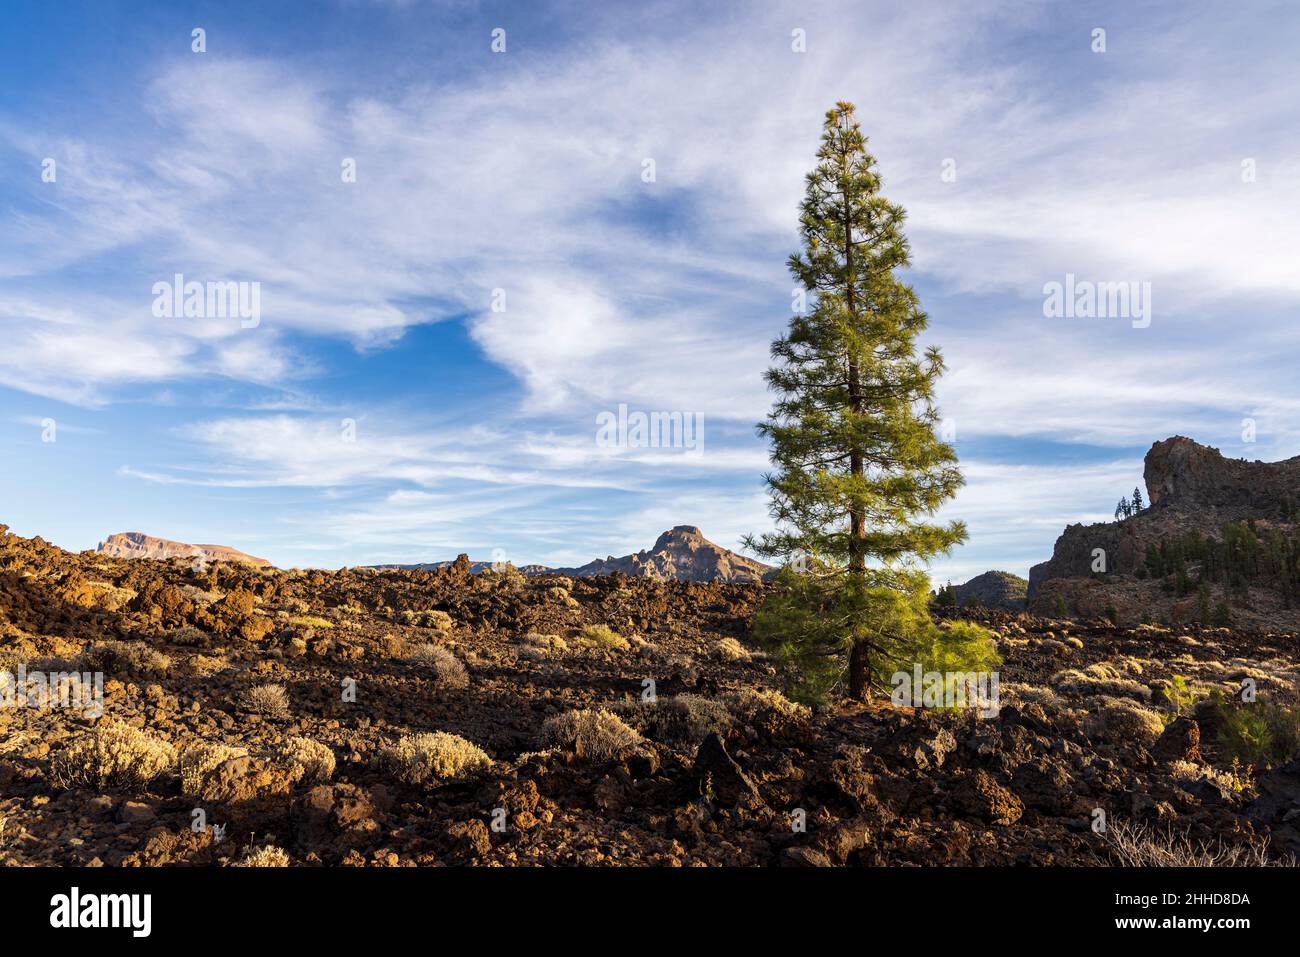 Canarian pine trees, pinus canariensis, grow in the volcanic landscape at 2000 metres above sea level in the Las Cañadas del Teide National Park, Tene Stock Photo